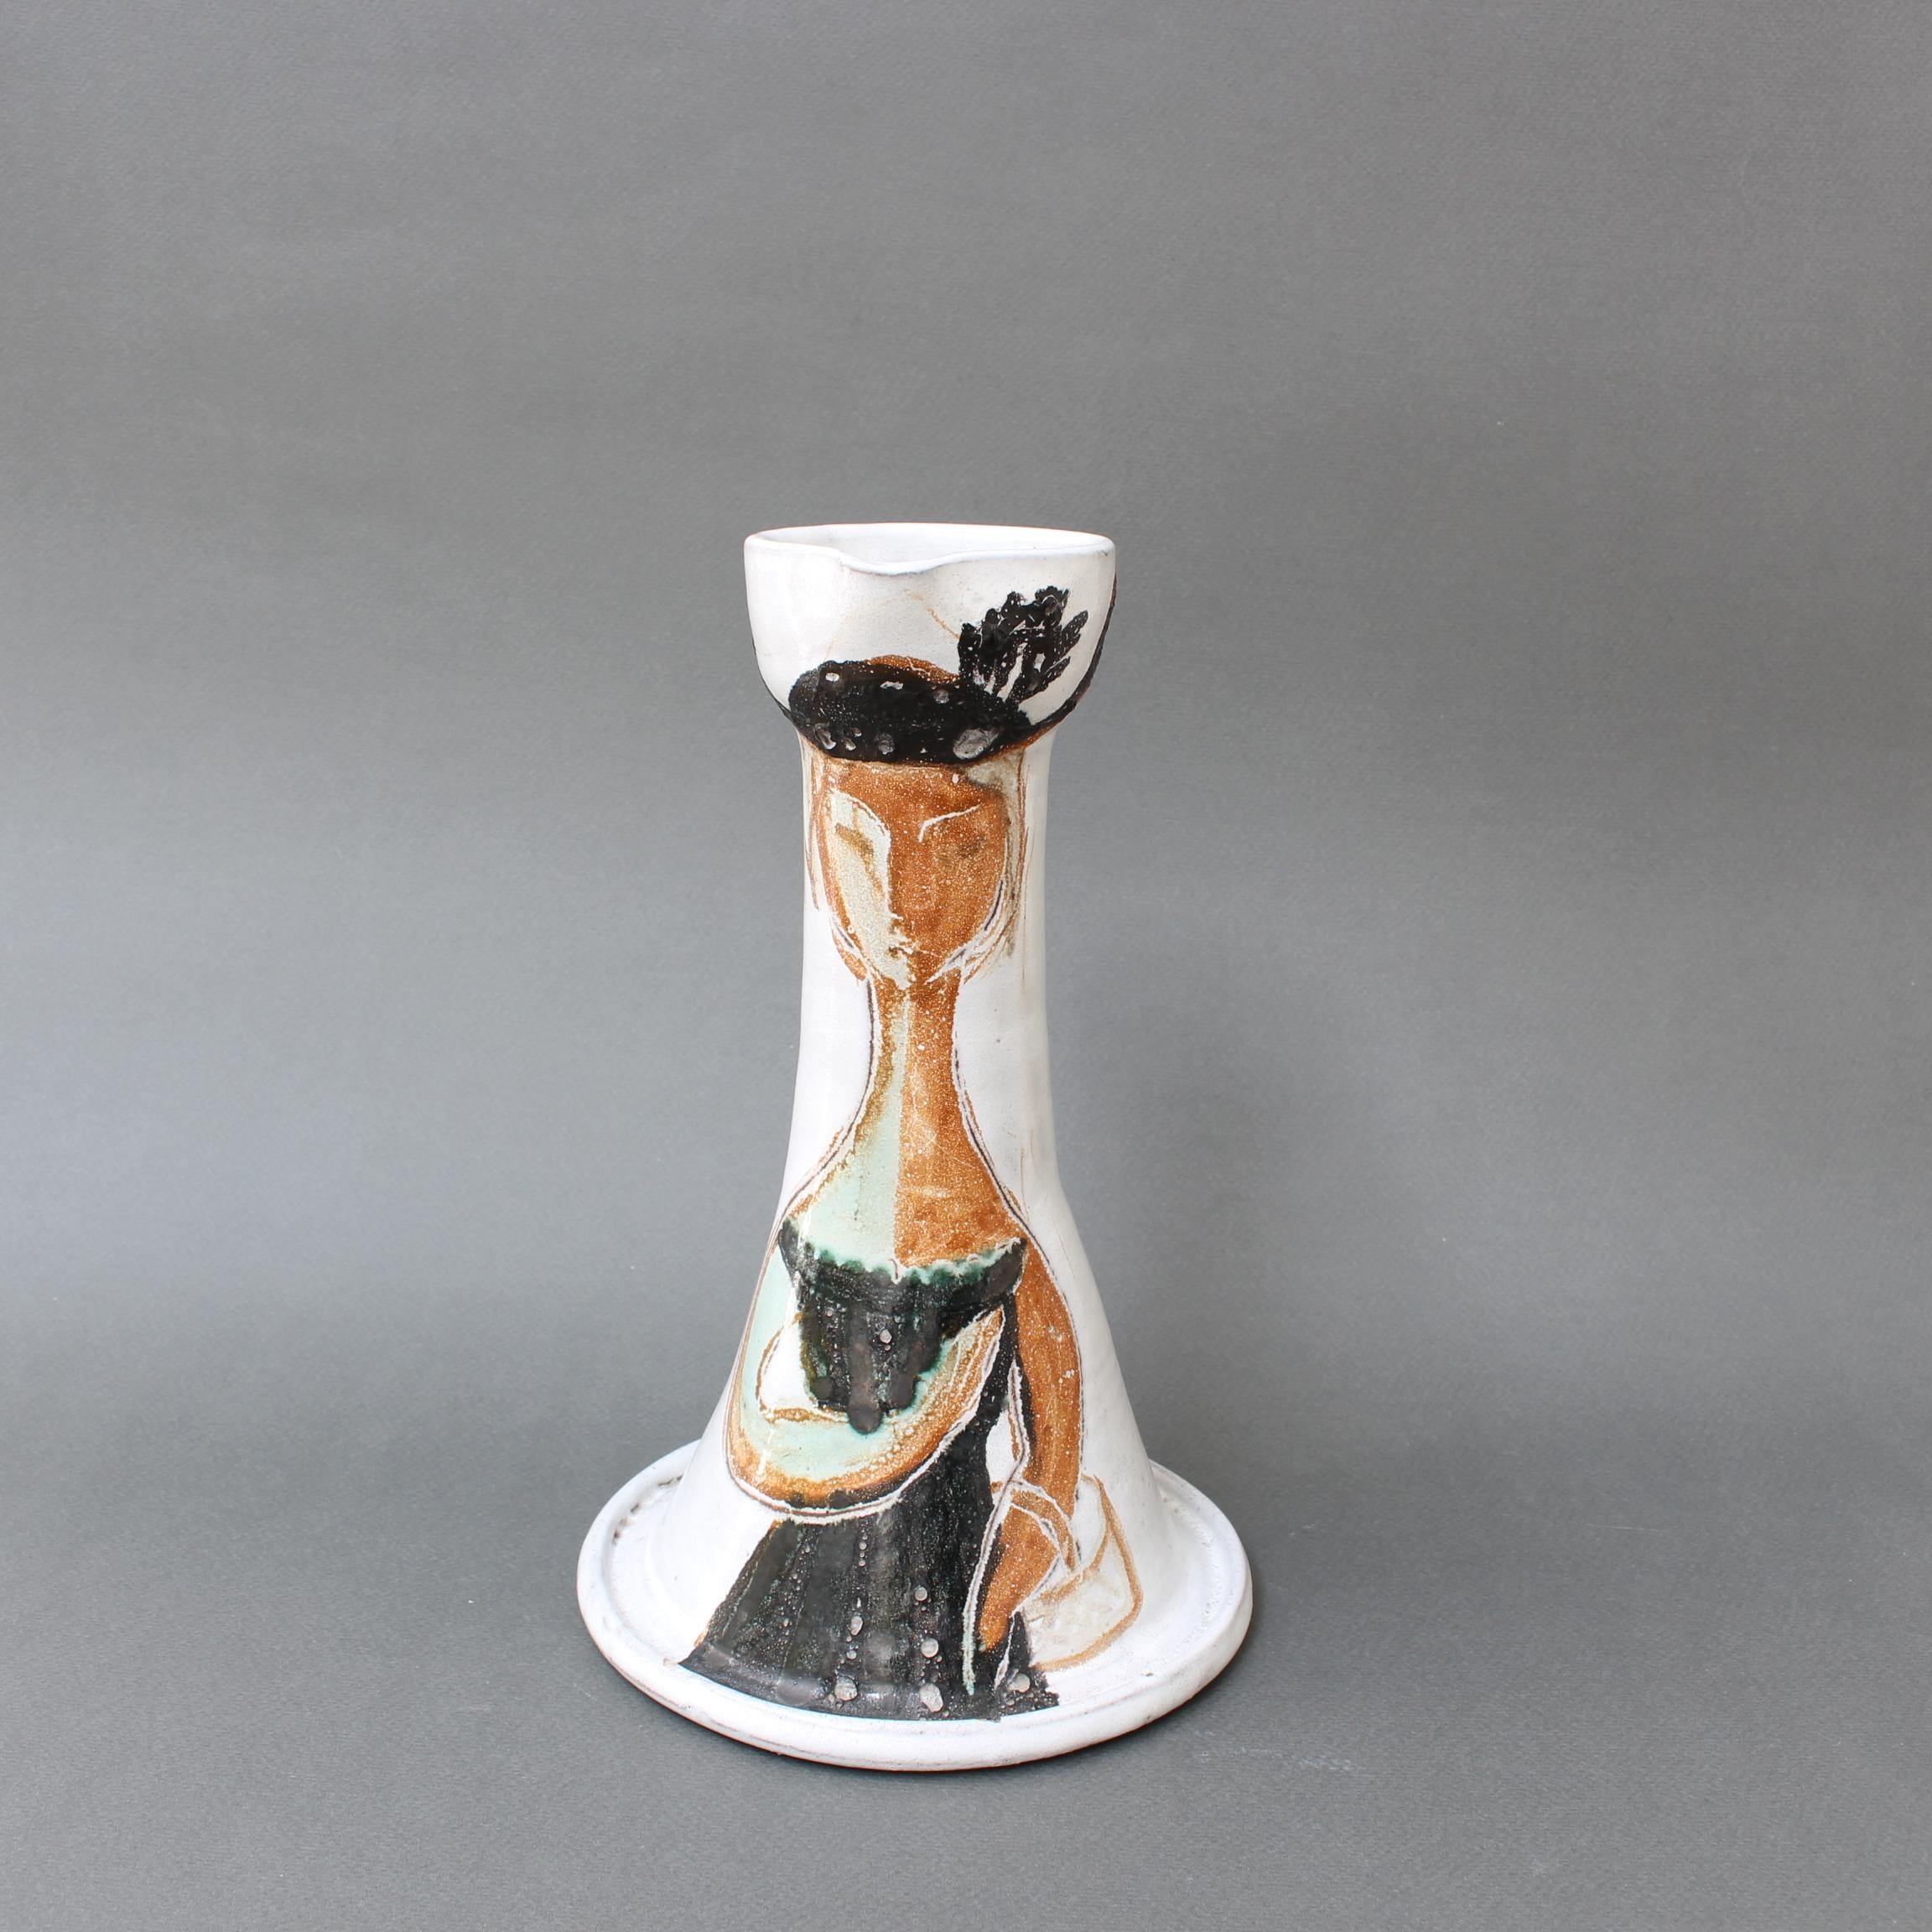 French mid-century ceramic lamp base by Atelier du Grand Chêne (circa 1950s). Painted with decor of a stylish woman in feathered cap and fashionable handbag, the piece is absolutely charming and delightfully representative of its era and Provençal